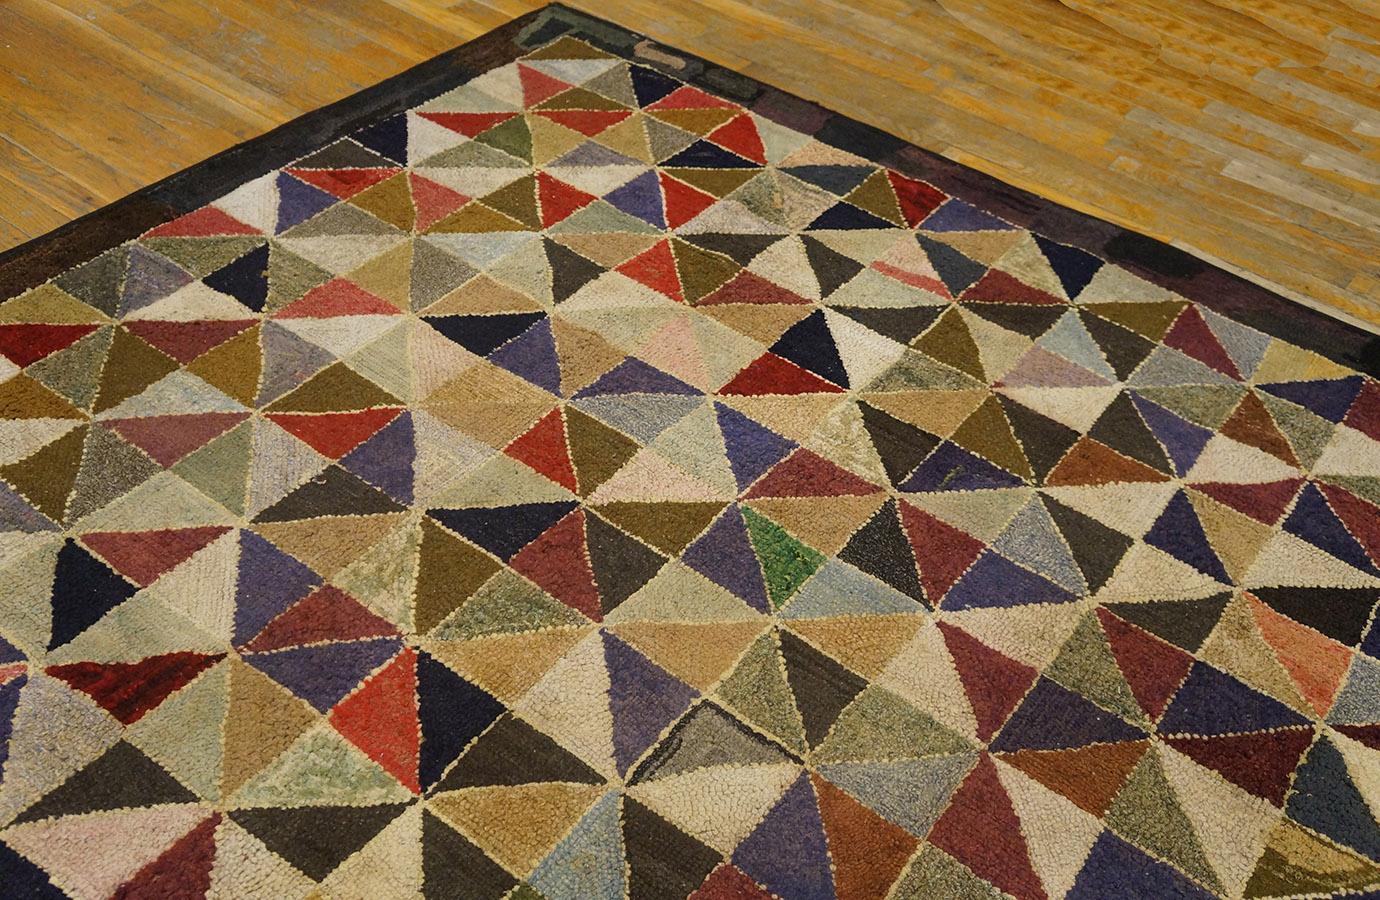 Early 20th Century American Hooked Rug ( 6' x 6' - 183 x 183 cm ) For Sale 1